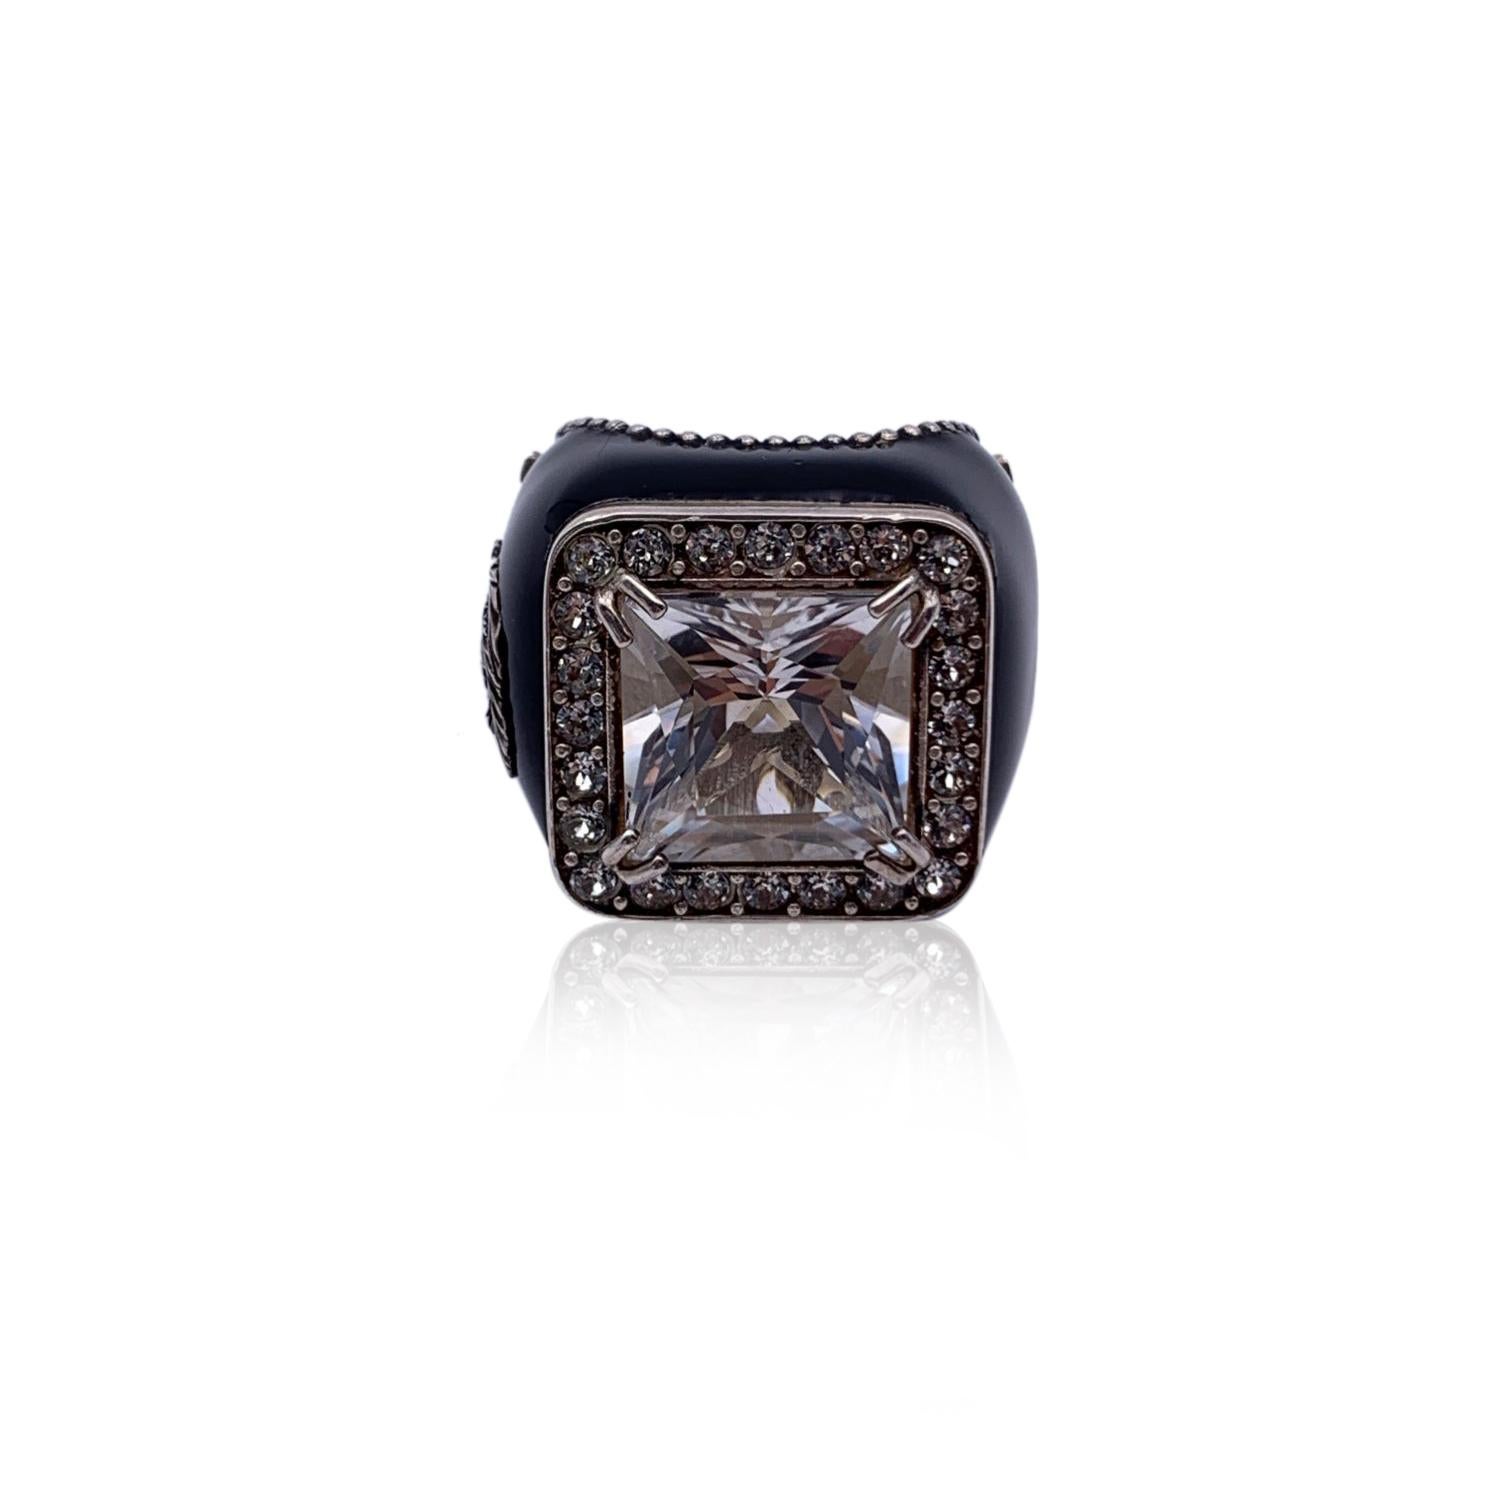 Beautiful GUCCI Sterling Silver Statement Ring. Signet style. Crafted of aged finish sterling silver 925 and black enamel. Big white/clear princess cut synthetic stone on top trimmed with clear crystals. GG - Gucci logo detailing. Size: 12 IT (6 US